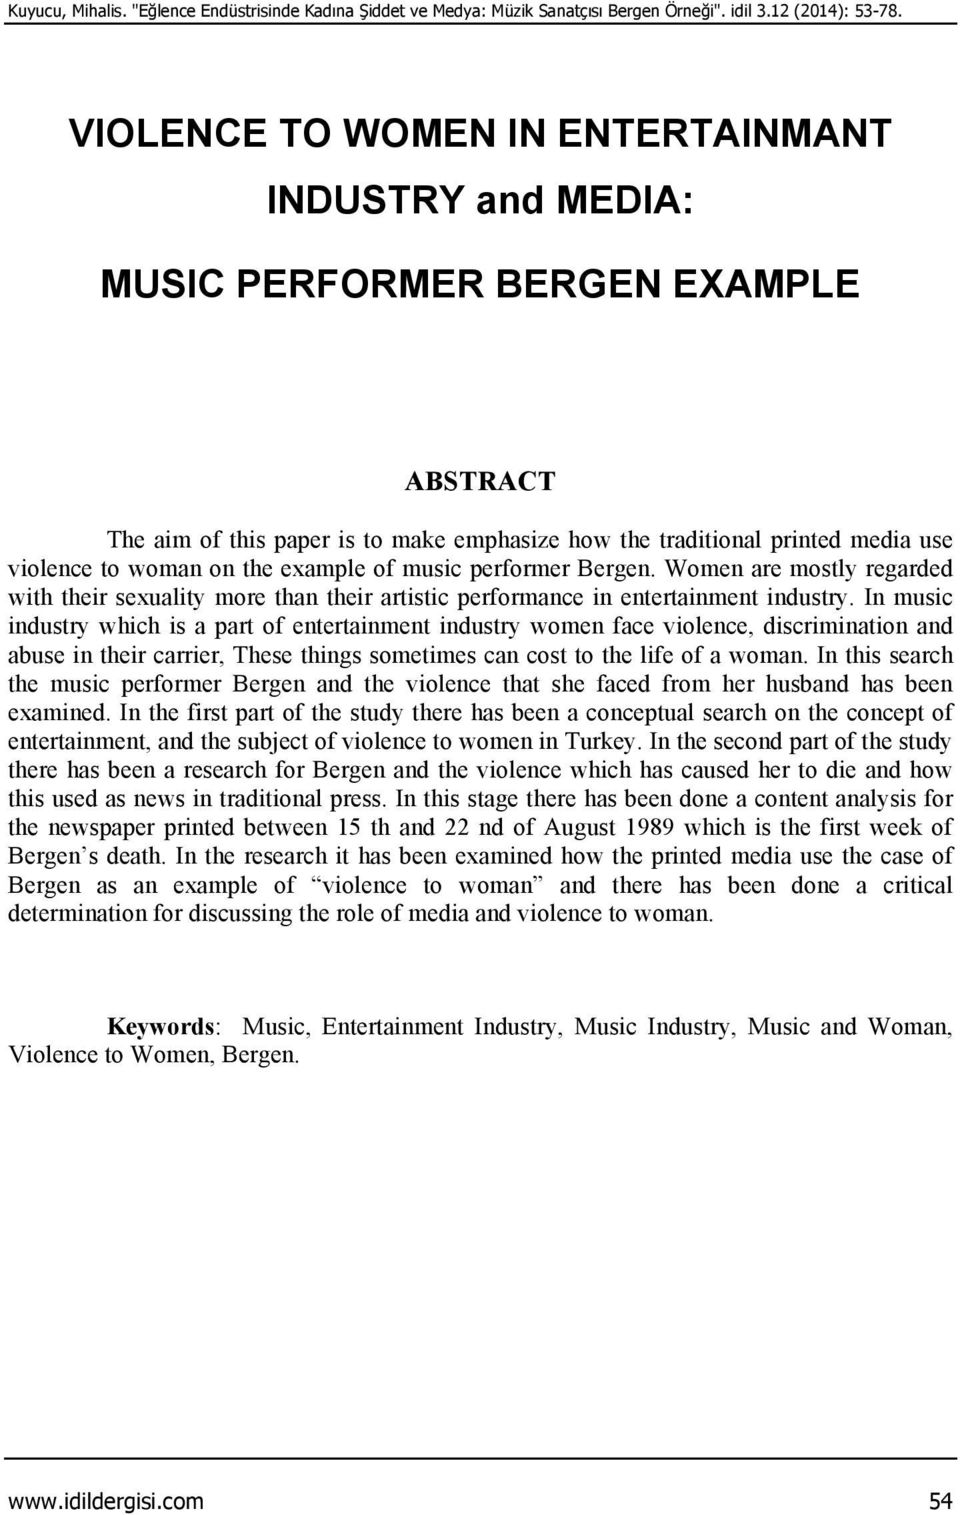 the example of music performer Bergen. Women are mostly regarded with their sexuality more than their artistic performance in entertainment industry.